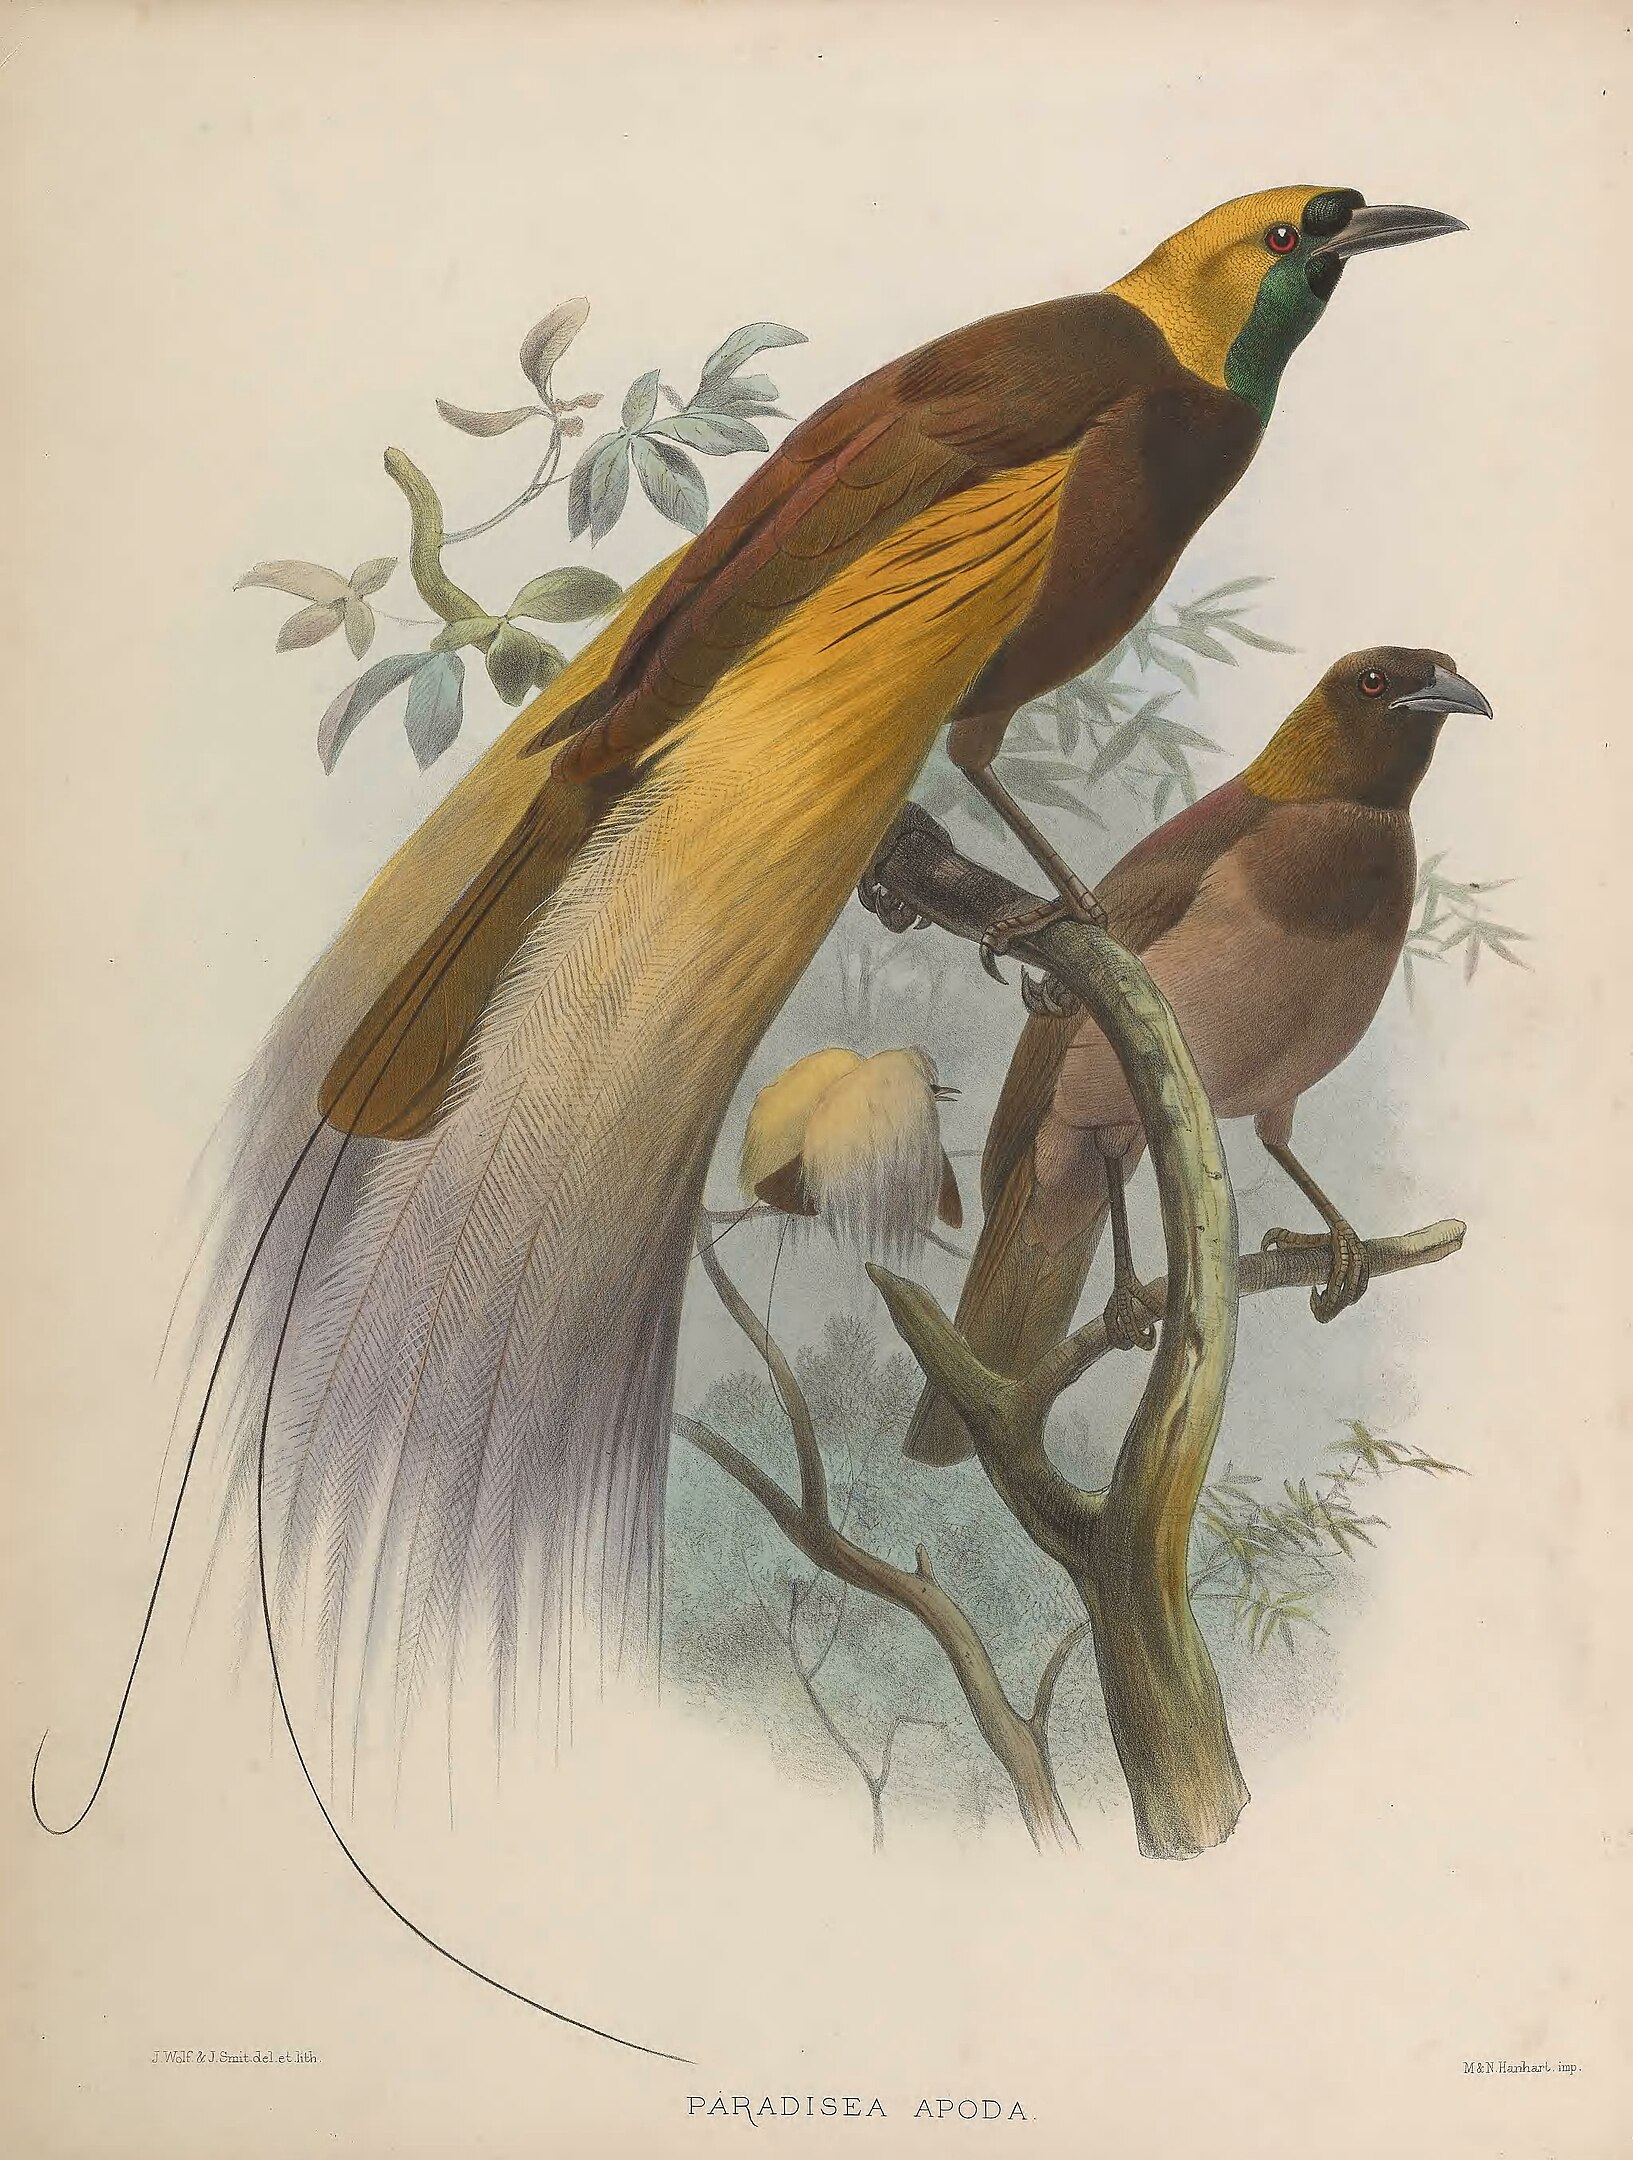 An illustration of two birds on a tree